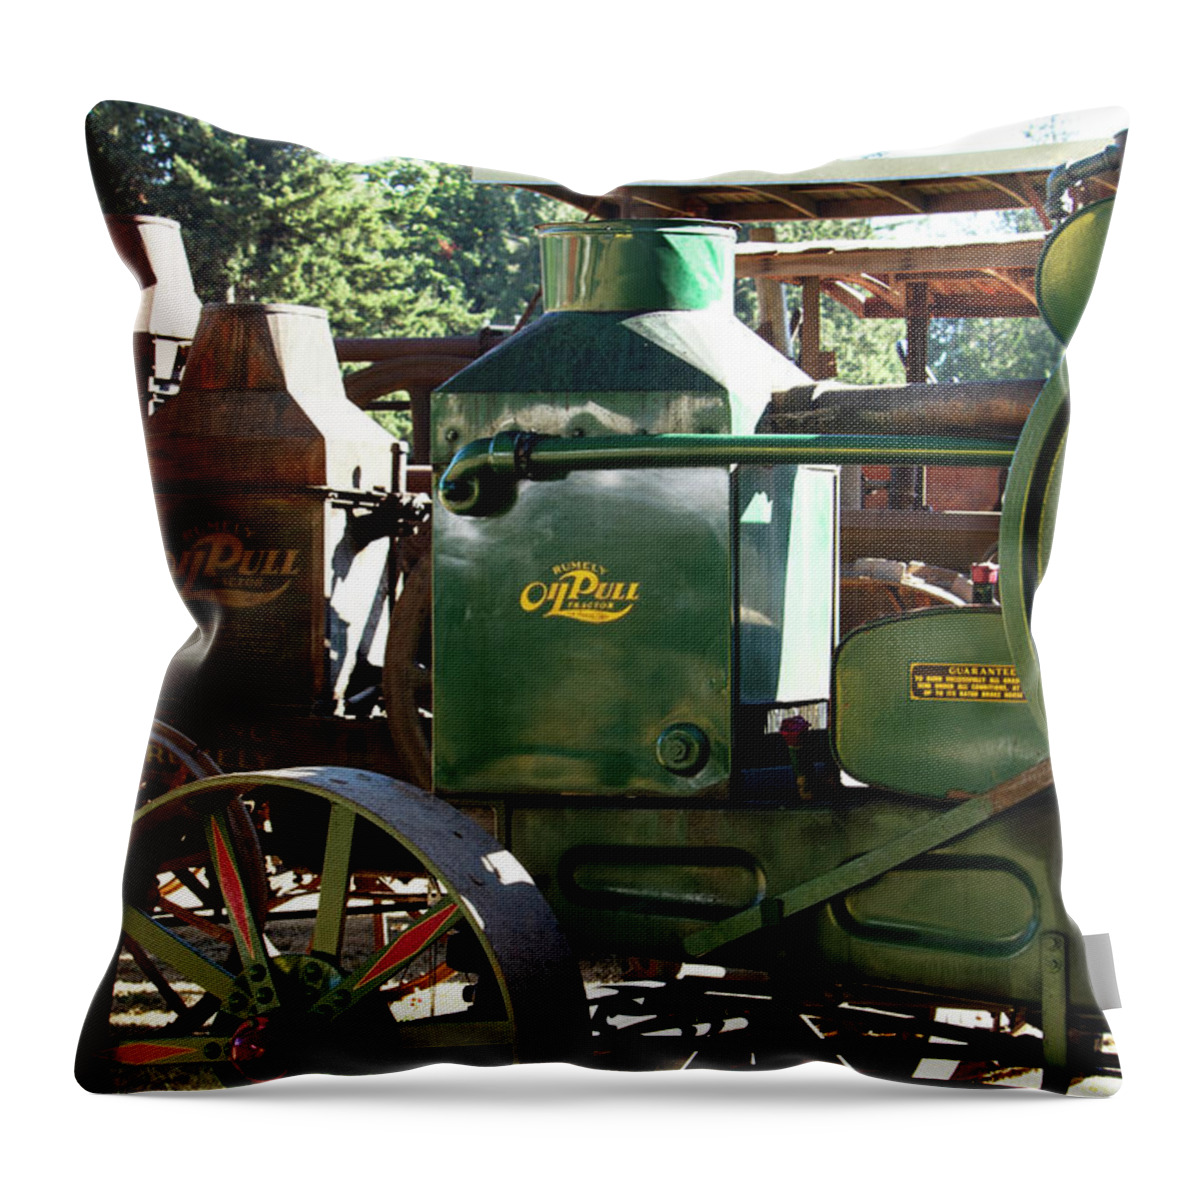 Rumely Oil Pull Throw Pillow featuring the photograph Rumely Oil Pull Tractors by Cheryl Day